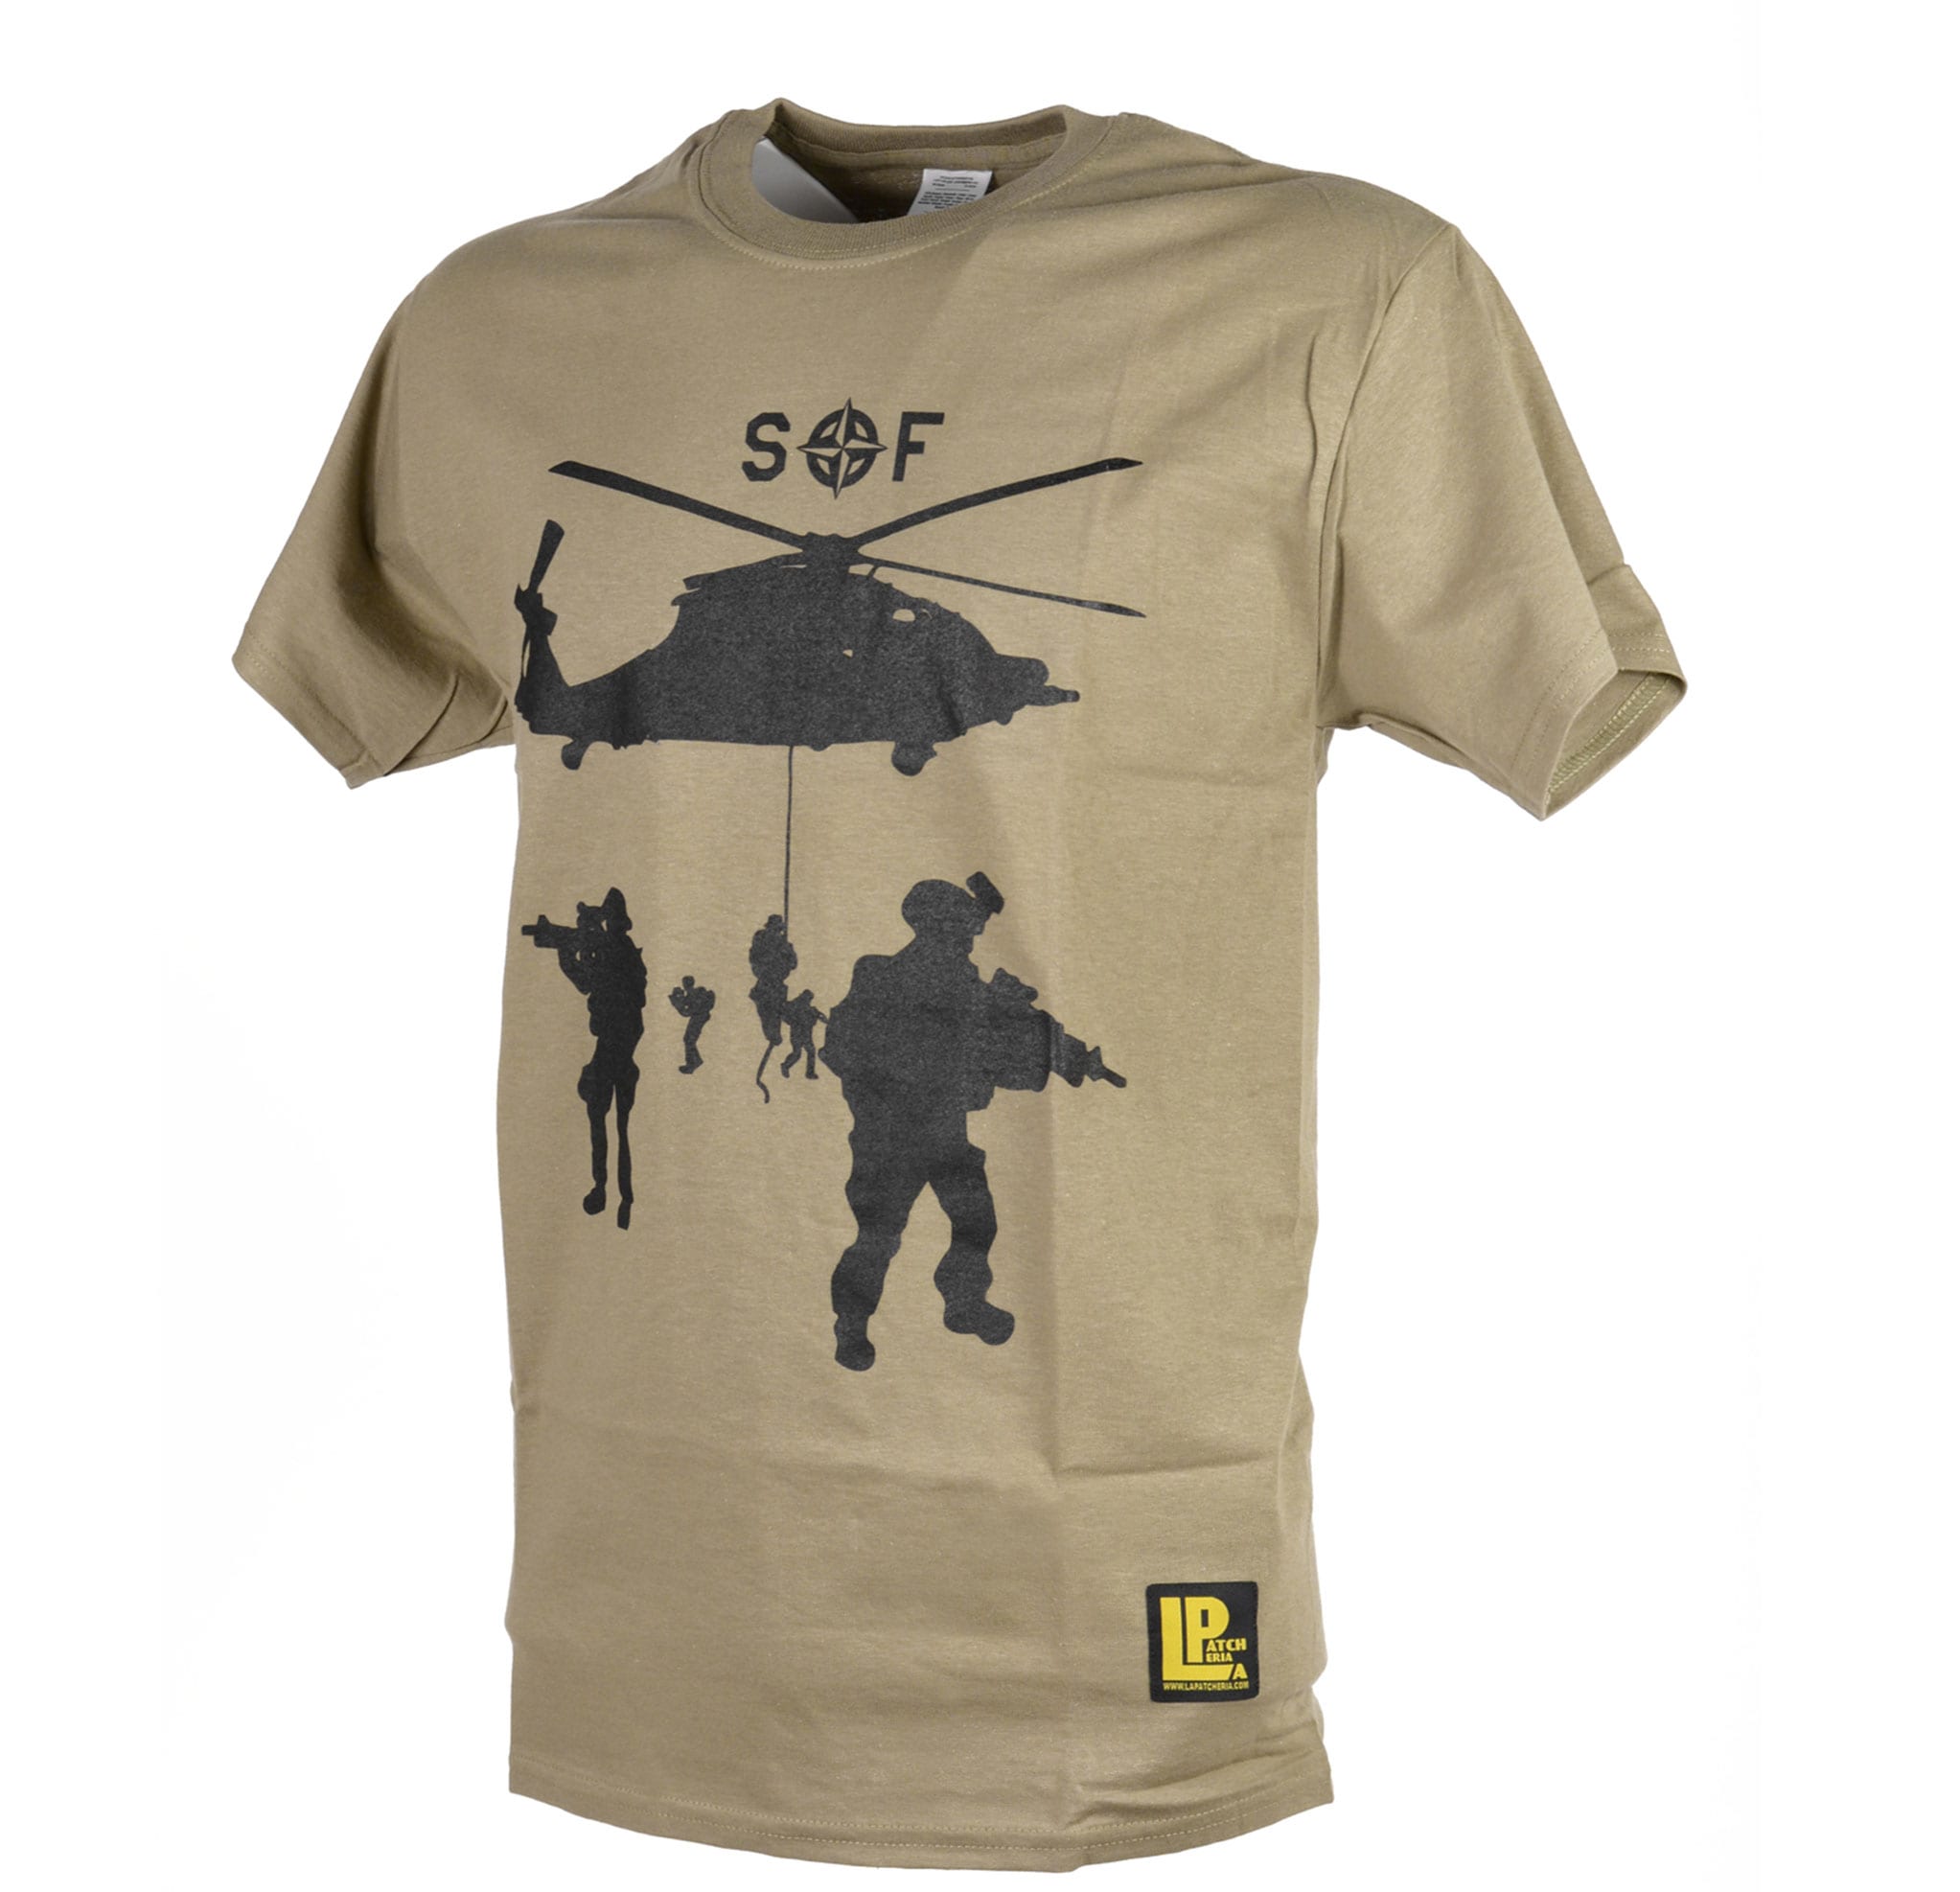 Purchase the La Patcheria T-Shirt Special Operation Forces OD ol